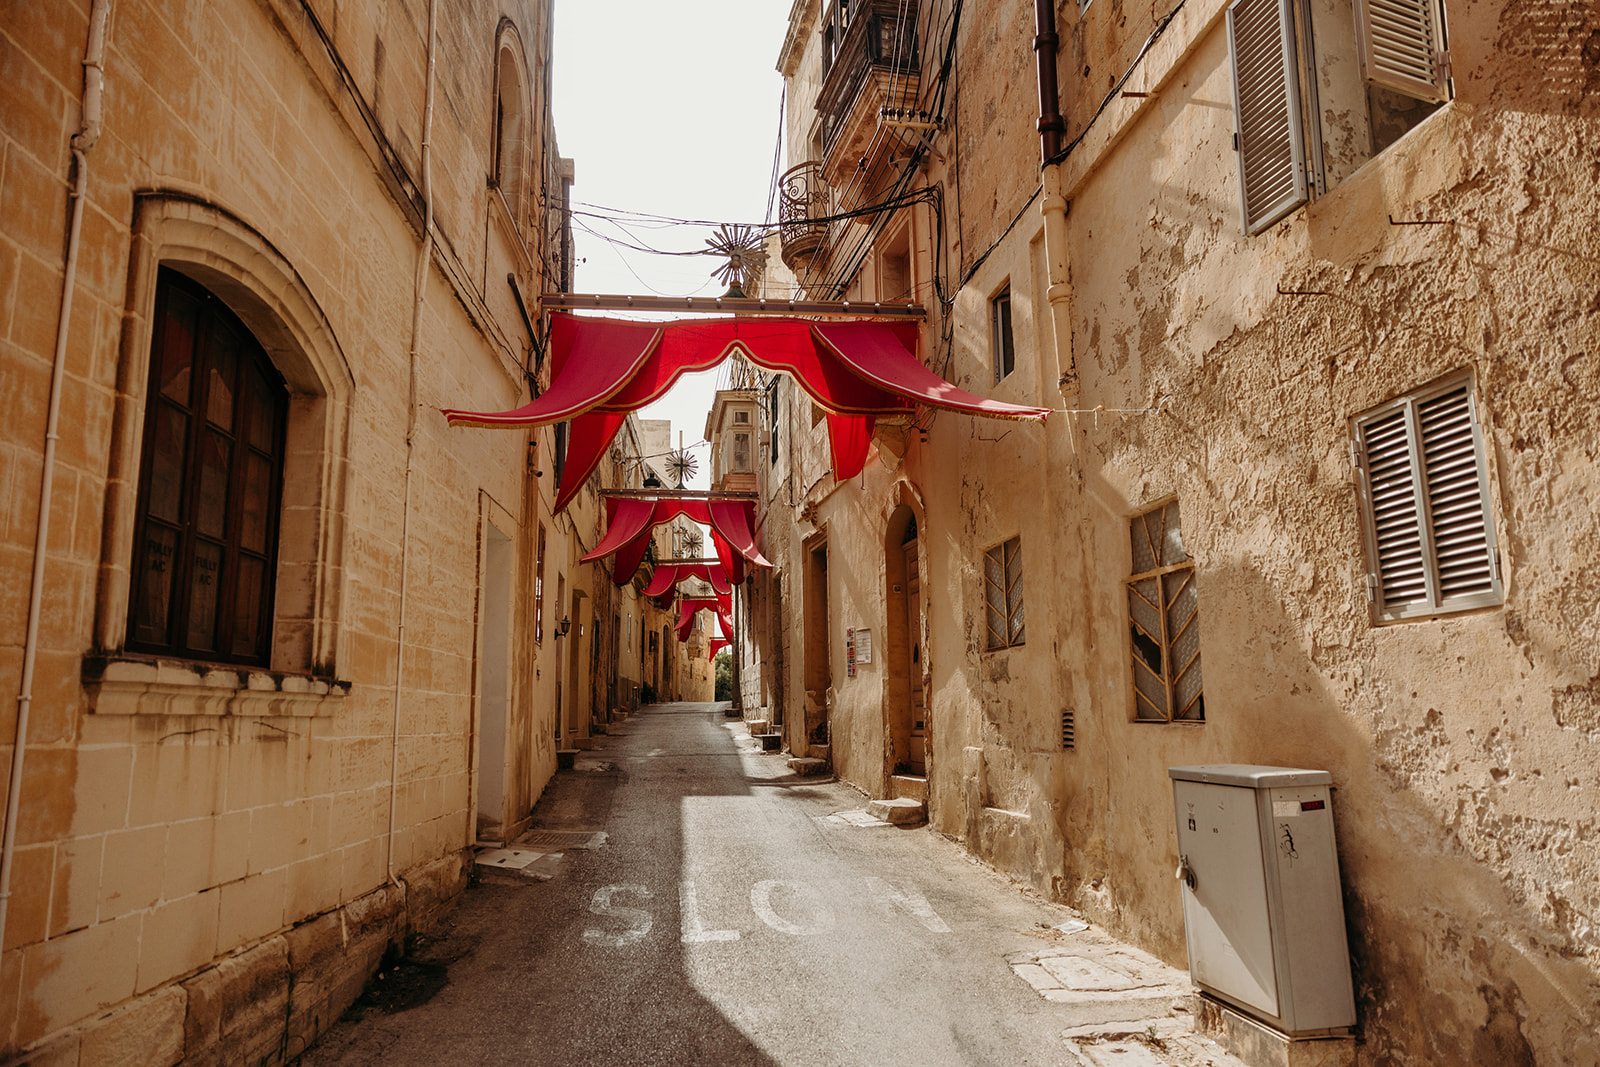 Flags adorned to sun-kissed buildings in Rabat, Malta for festival celebrations